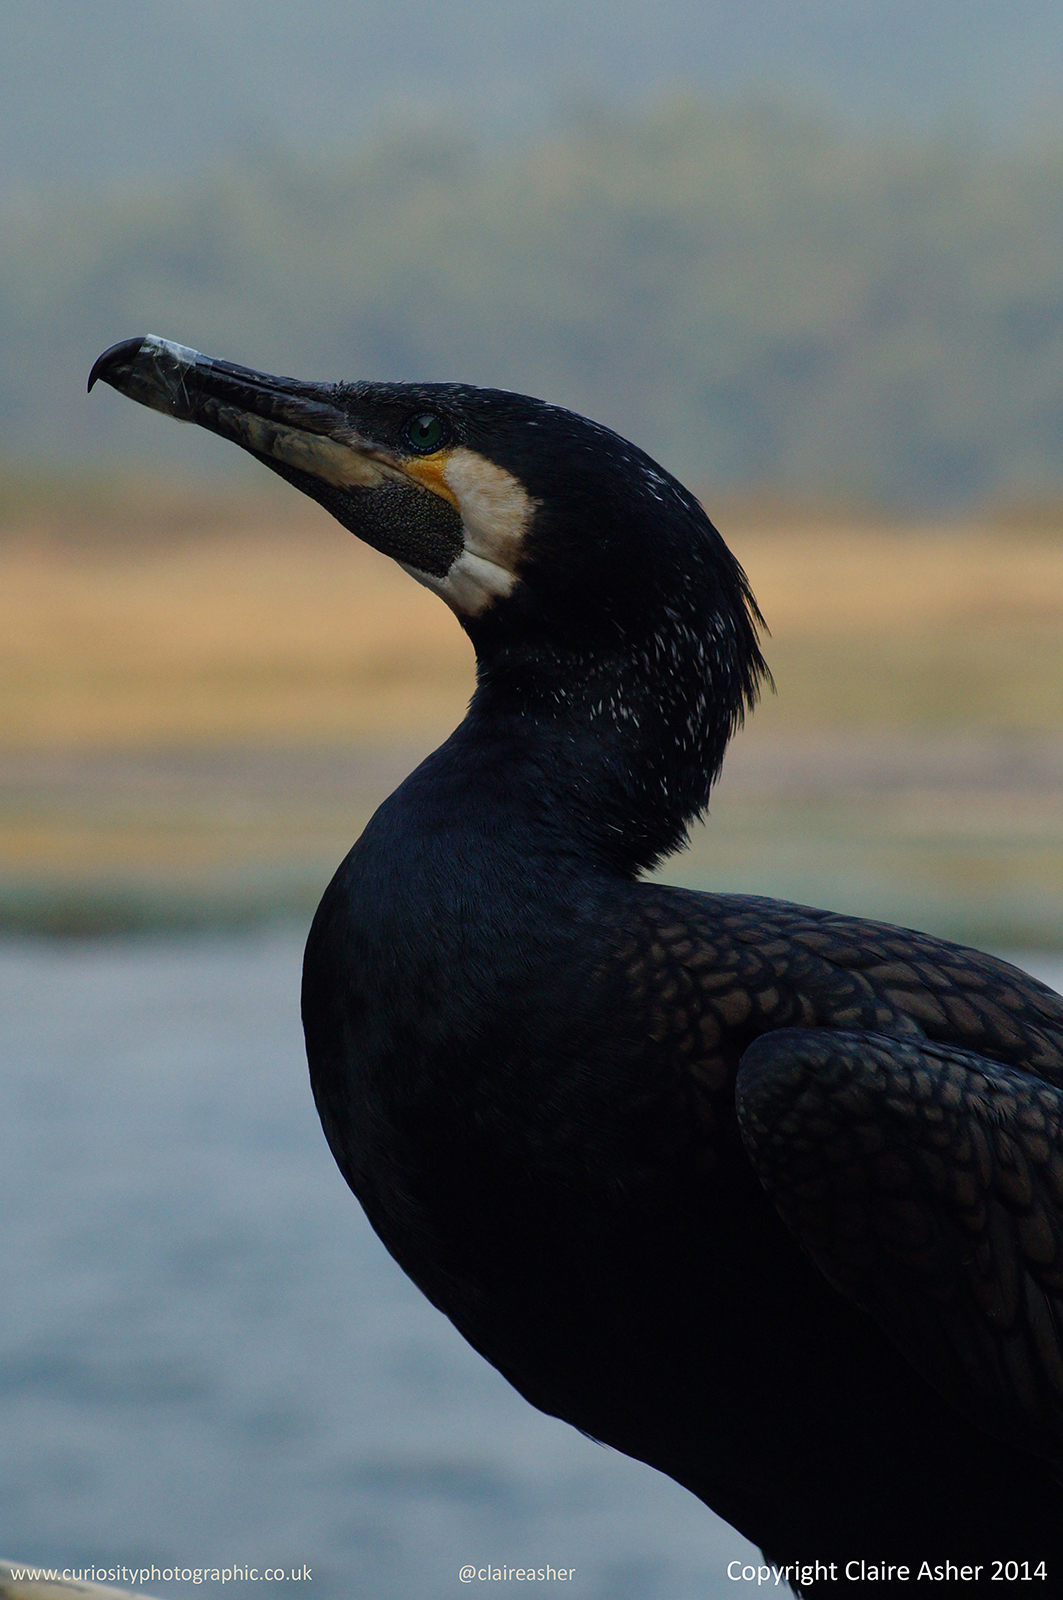 A Cormorant photographed in Yangshuo, China in 2013.